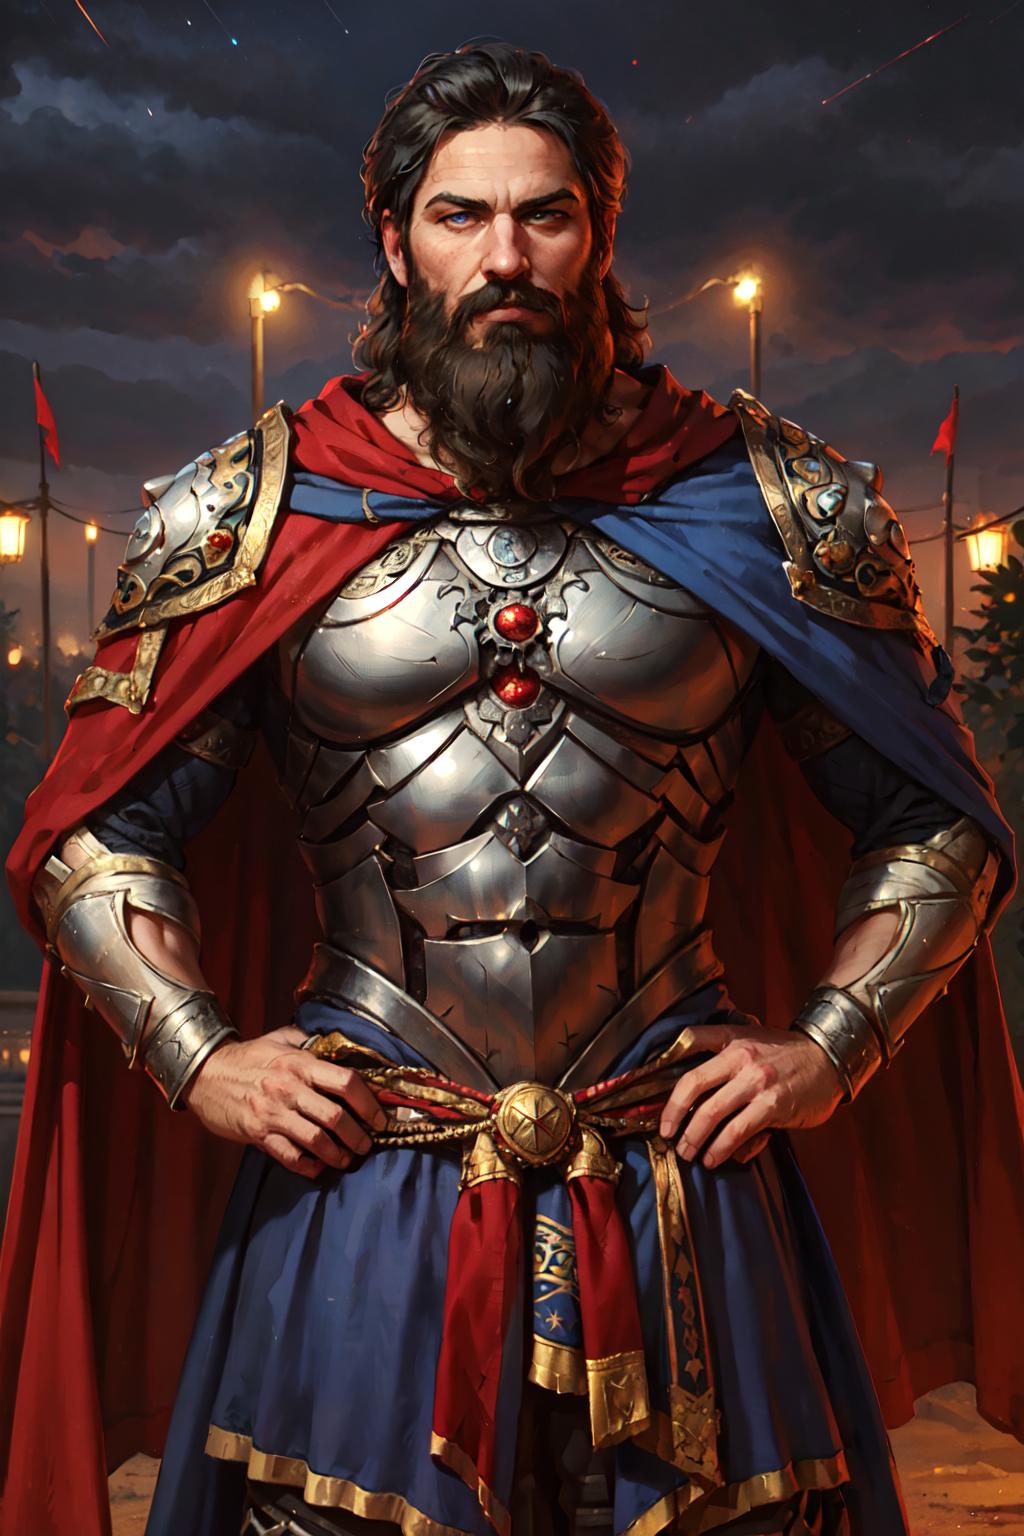 Vintage artwork of a warrior with a red cape, beard, and blue and red armor.